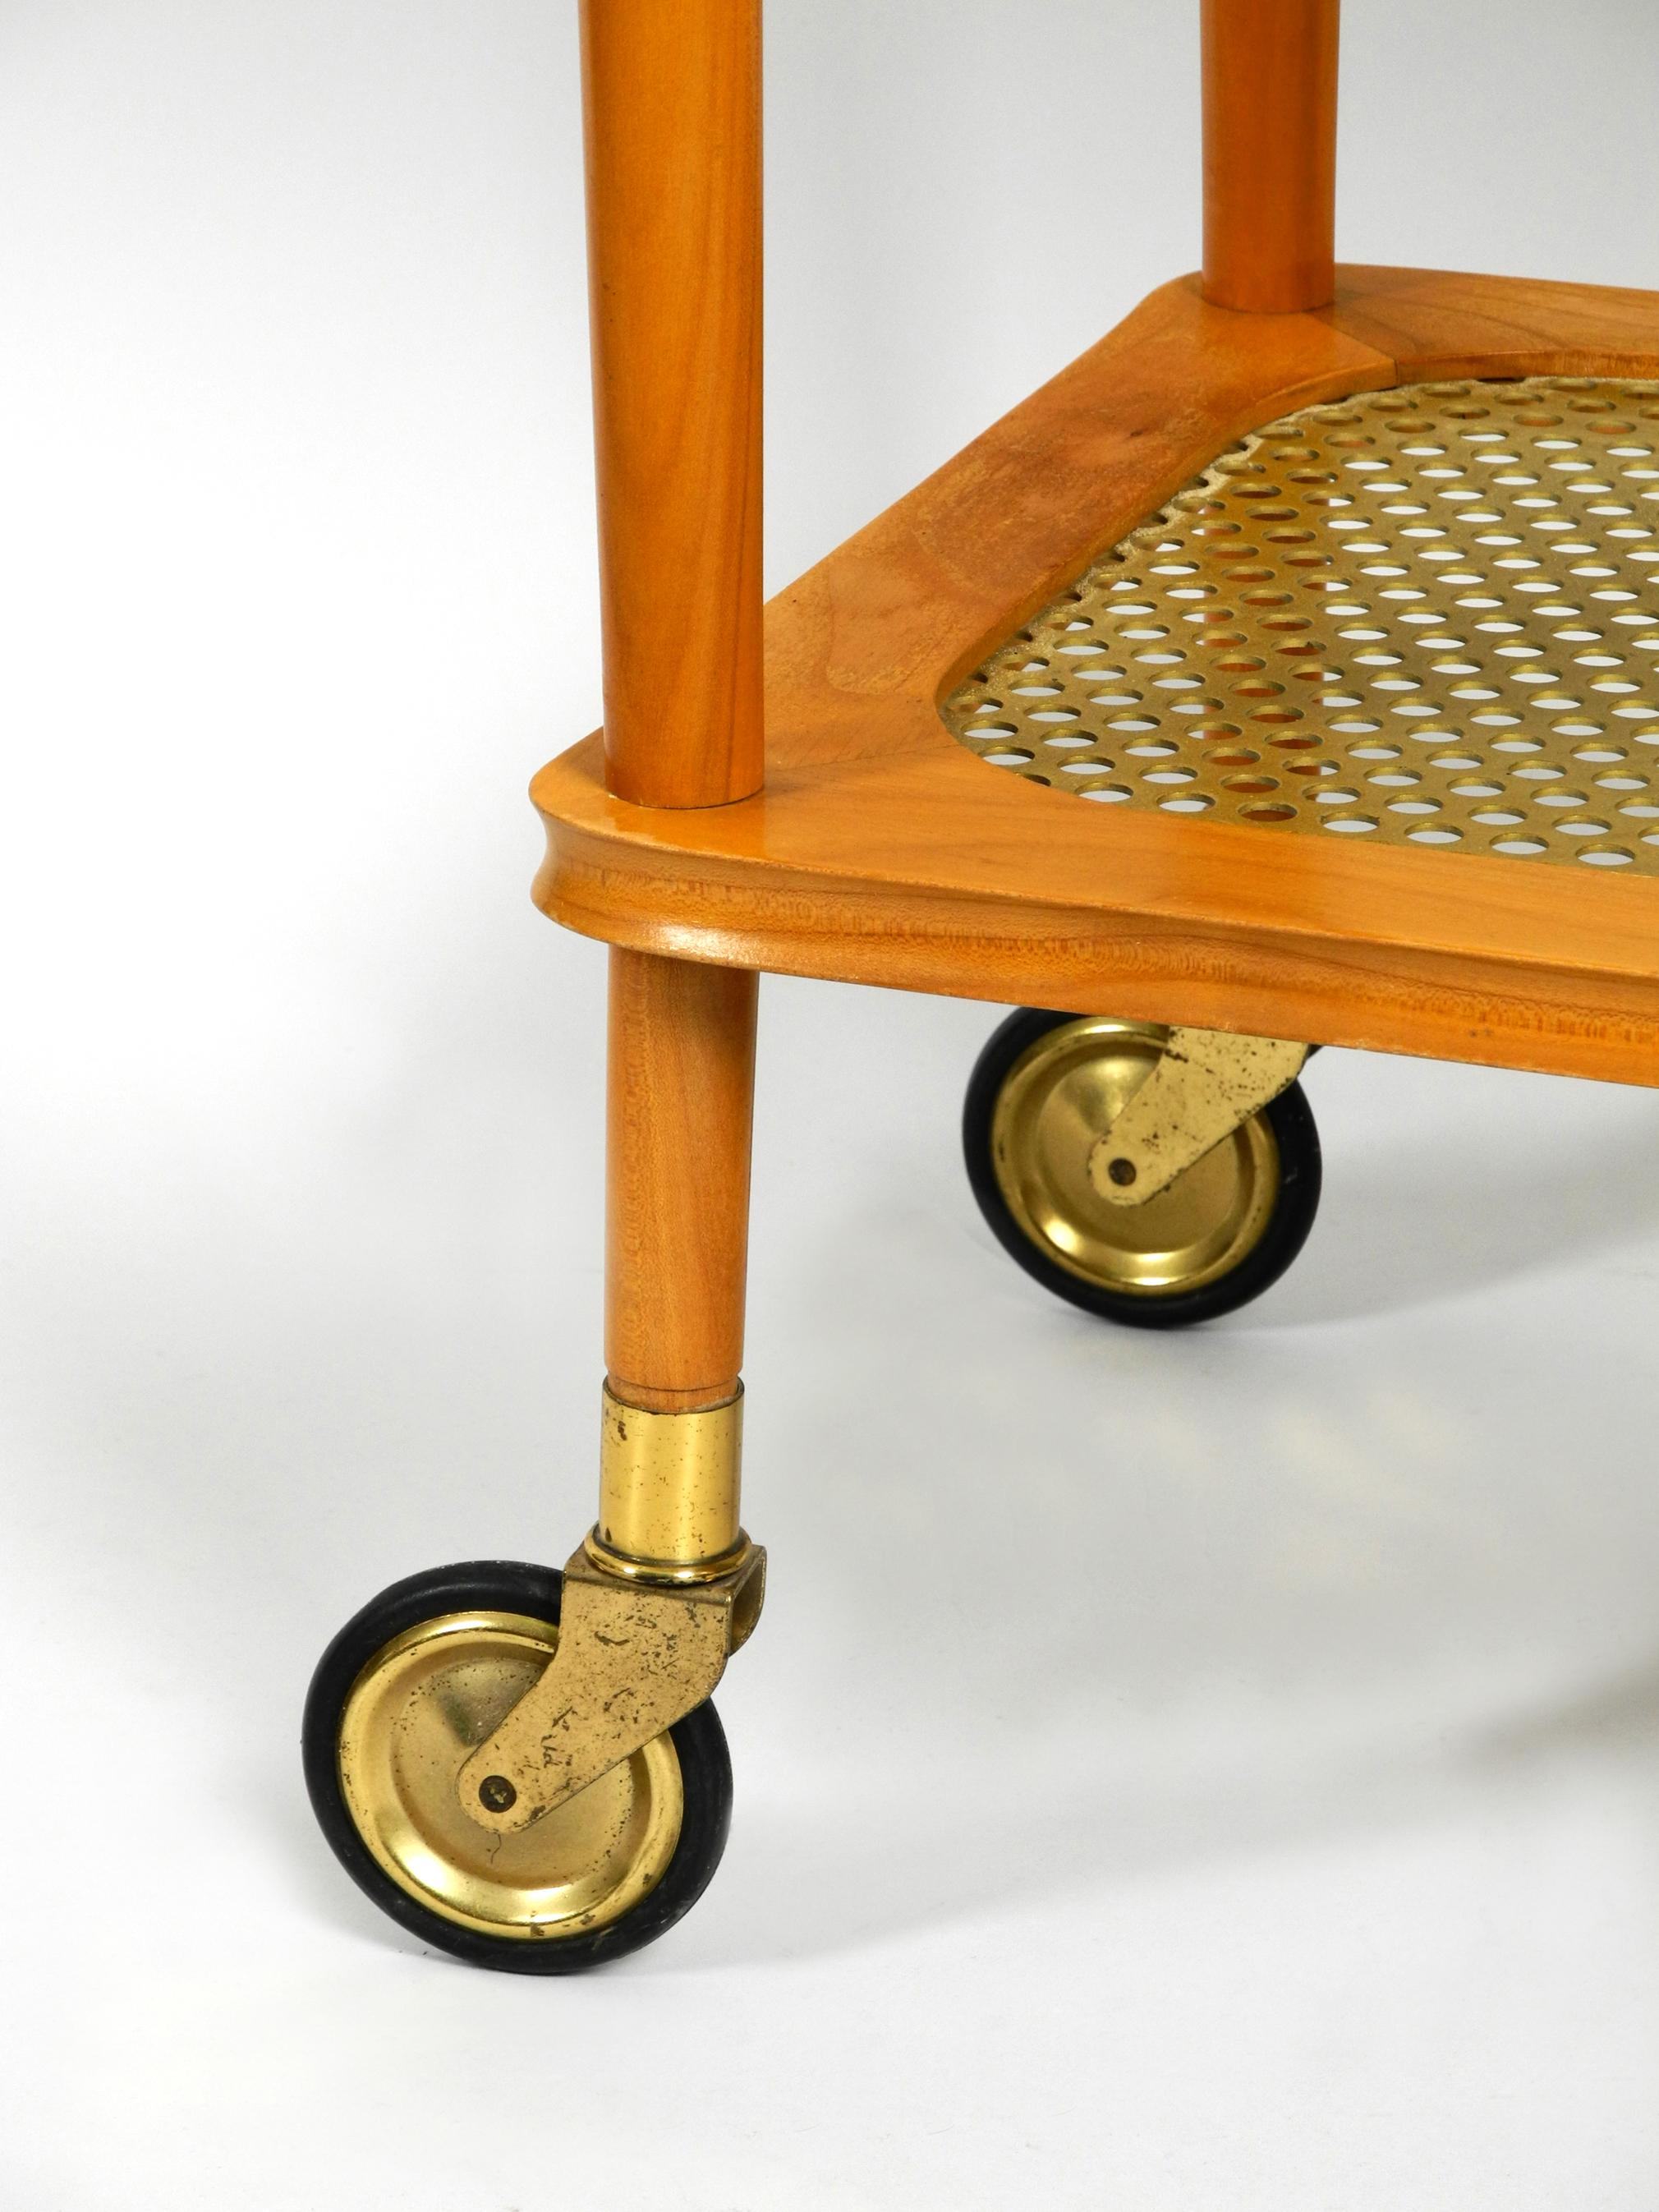 Beautiful Mid-Century Modern Serving Trolley Made of Walnut Wood and Brass 3